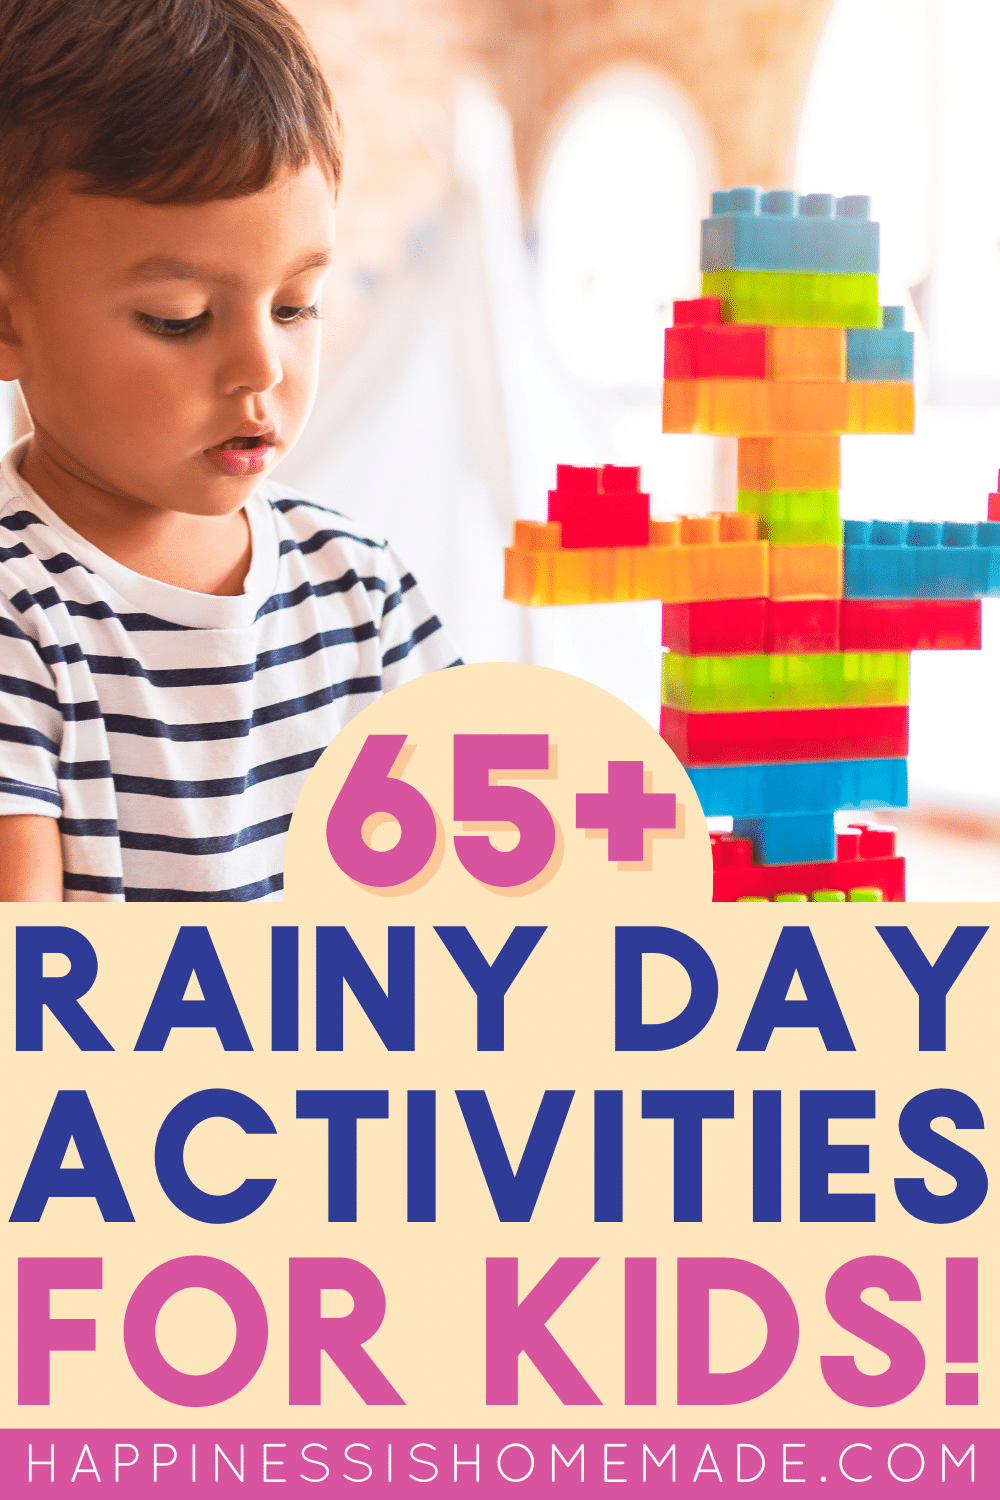 Printable Toddler Activities - Perfect for a Rainy Day Inside!